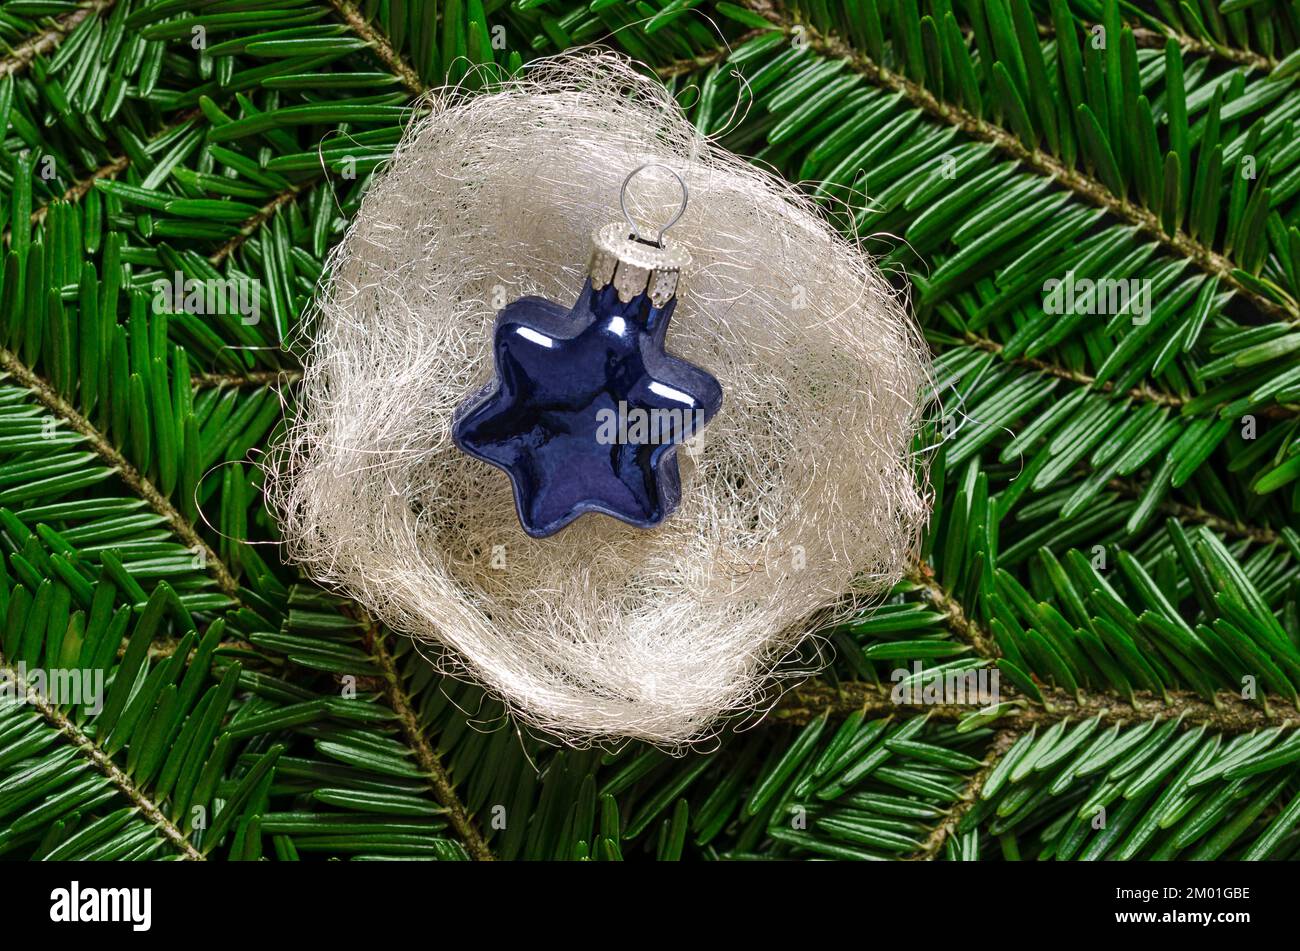 Blue glass star, in a silvery-white angel hair nest, over fresh green fir branches. Star shaped glass bauble to hang on a Christmas tree. Stock Photo